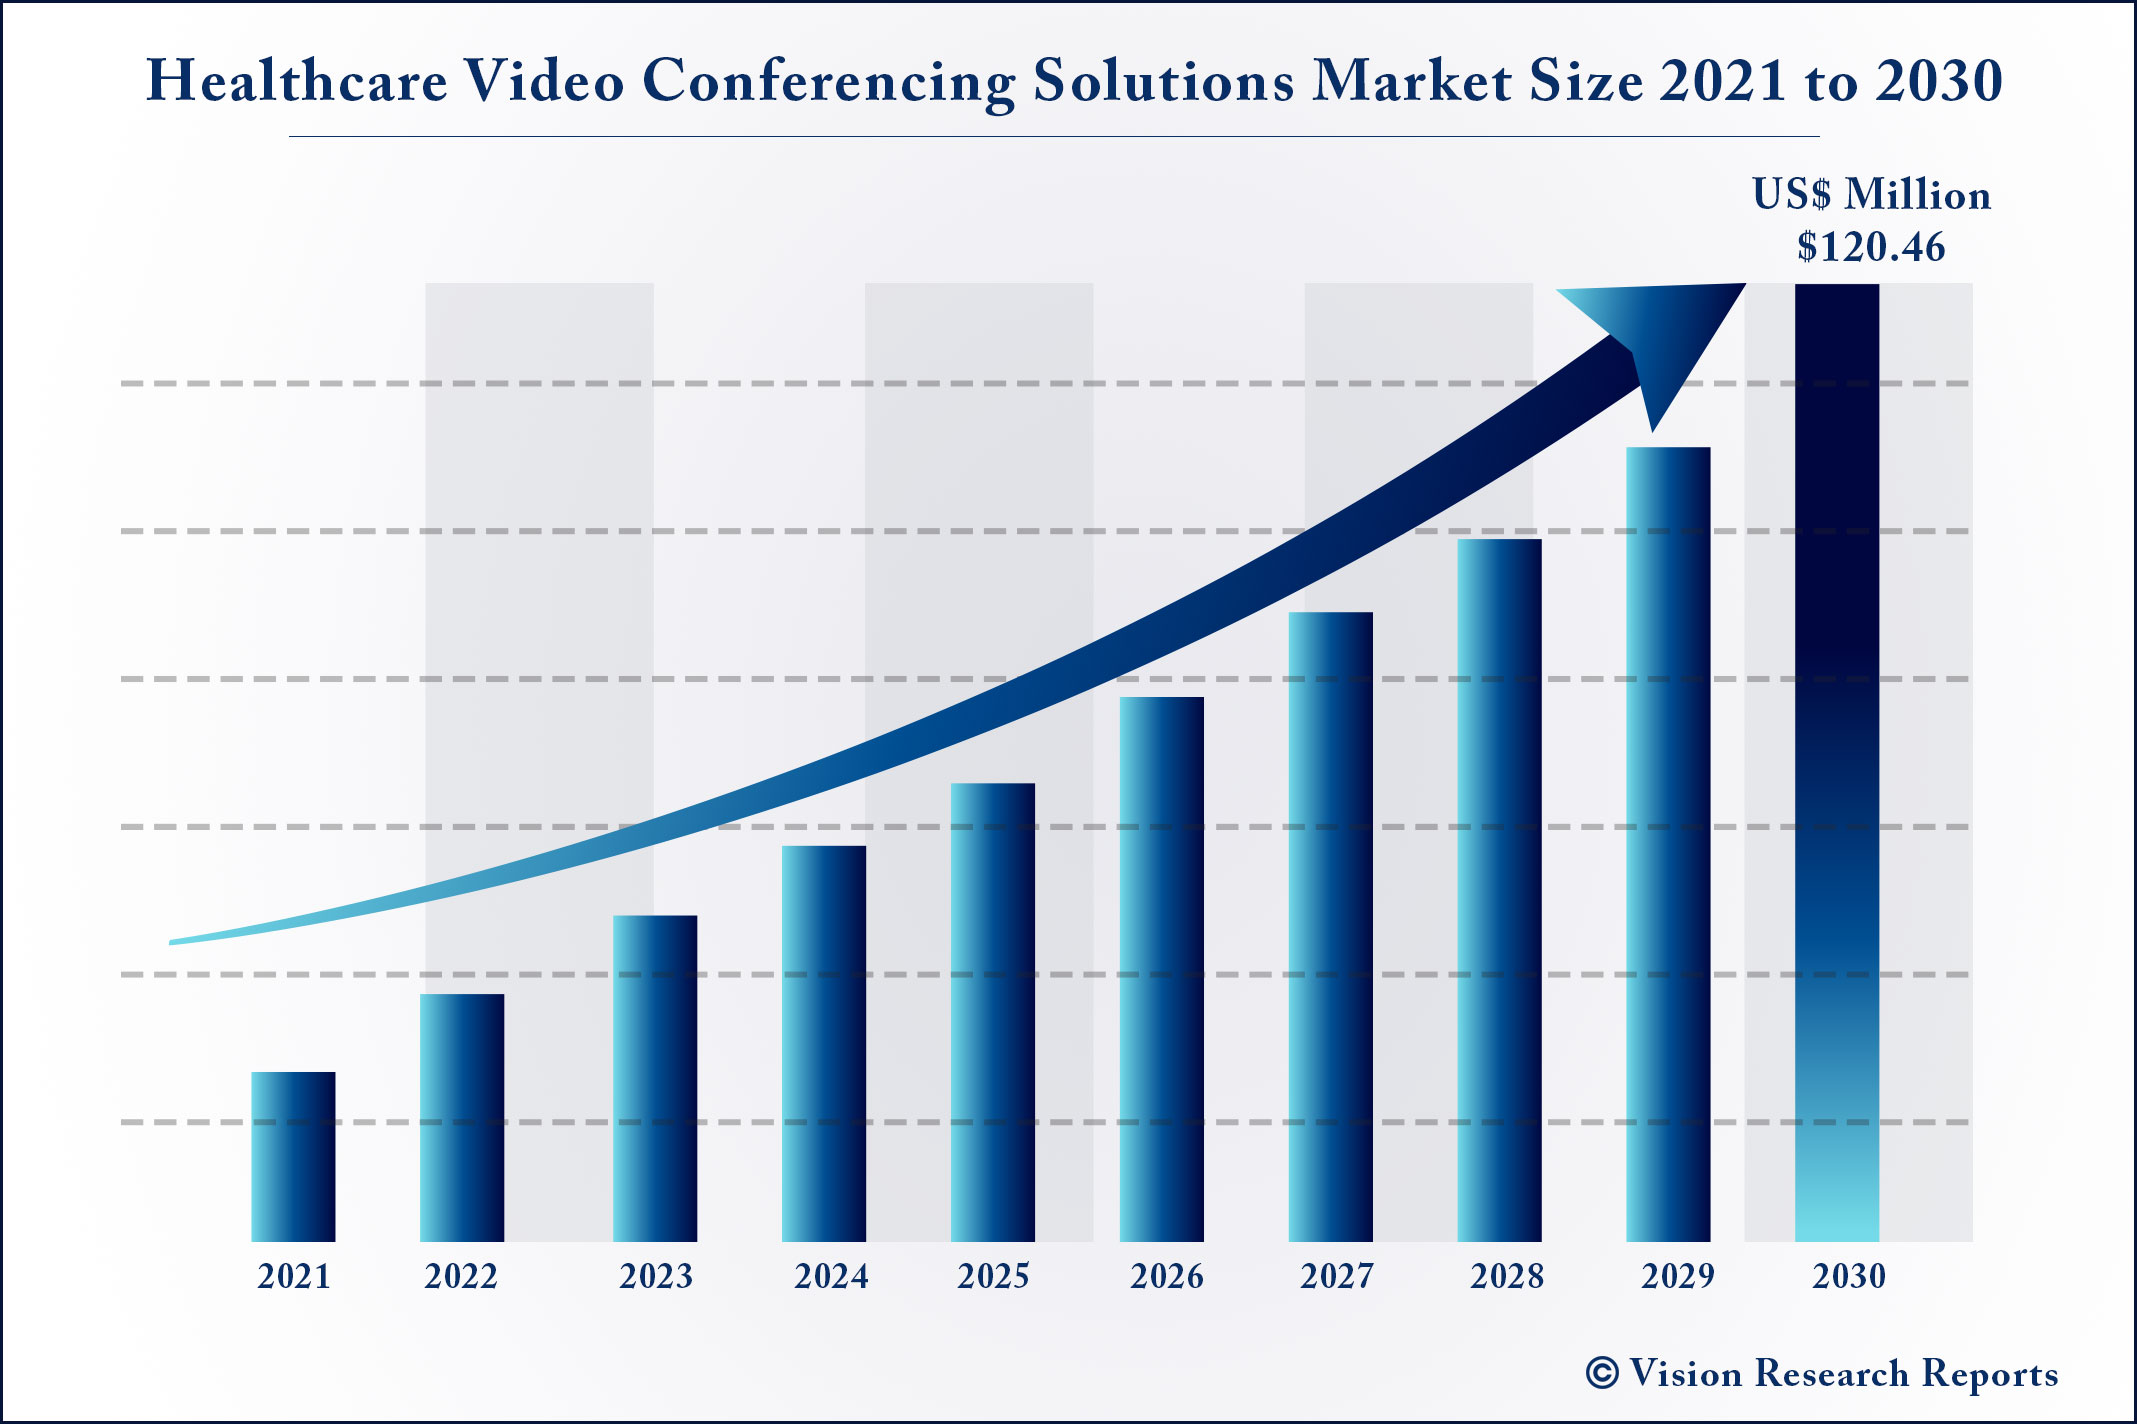 Healthcare Video Conferencing Solutions Market Size 2021 to 2030